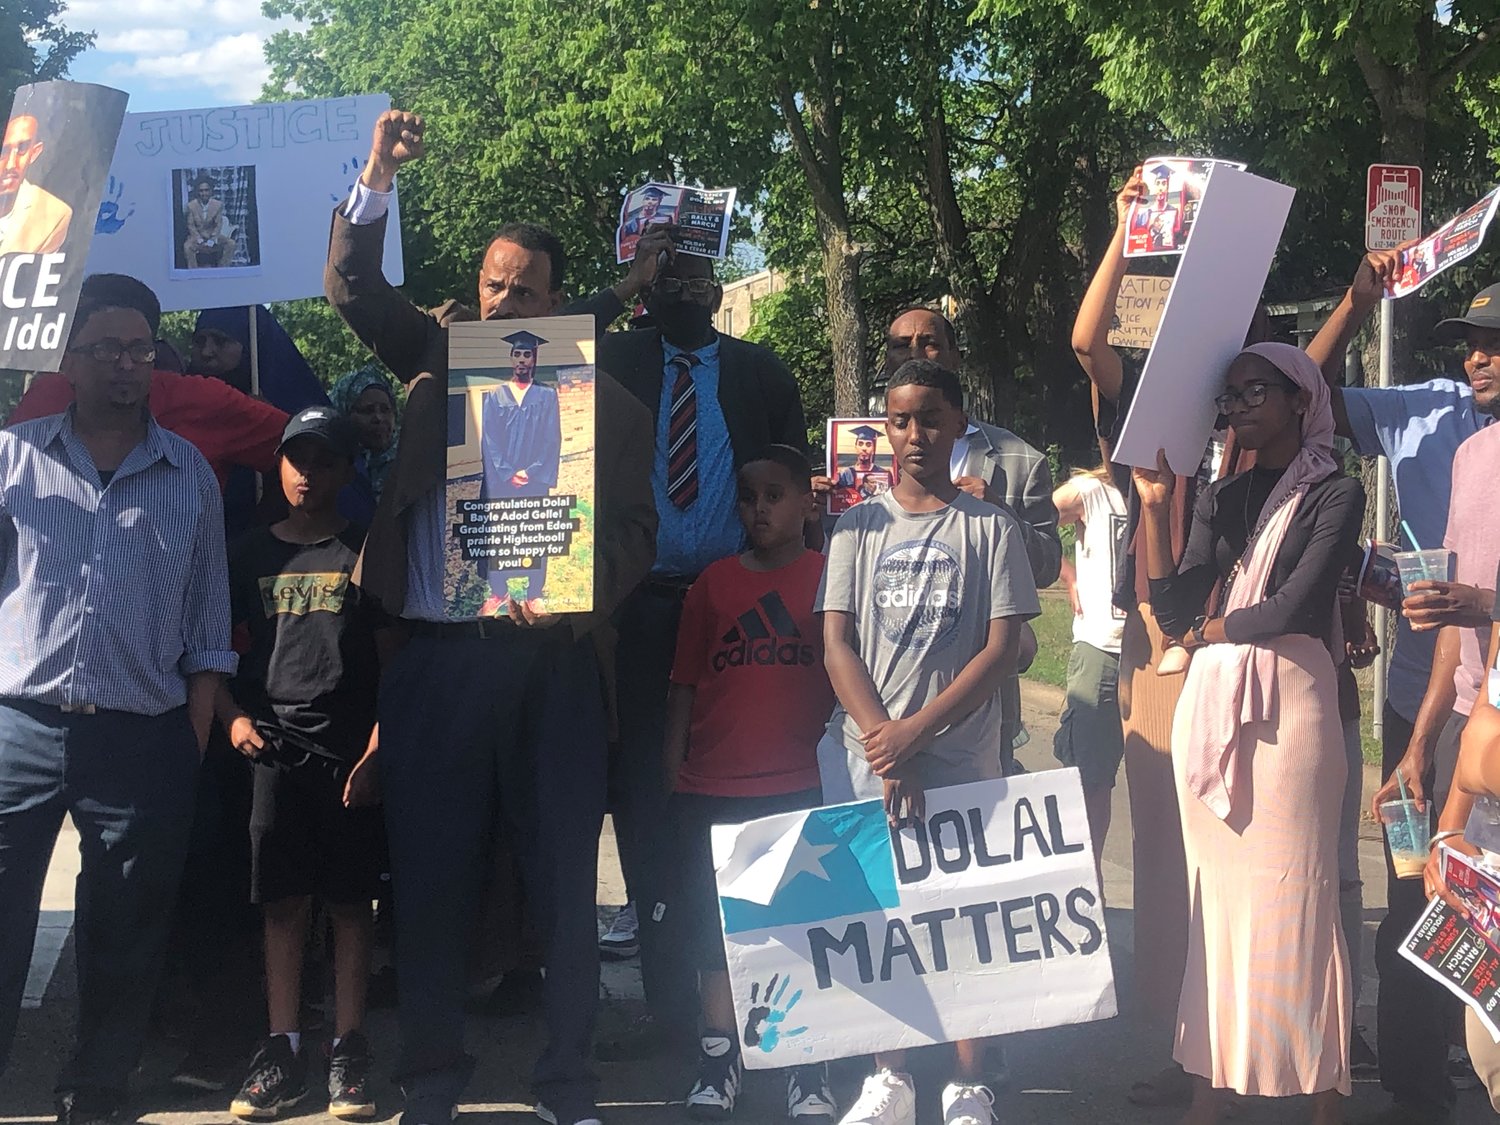 Bayle Gelle, Dolal Idd’s father (center left, with fist raised), stands with family members and supporters during a march on June 6, 2021 demanding answers into the killing of his son by Minneapolis police at the Holiday Station Store along Cedar Ave. (Photo by Jill Boogren)